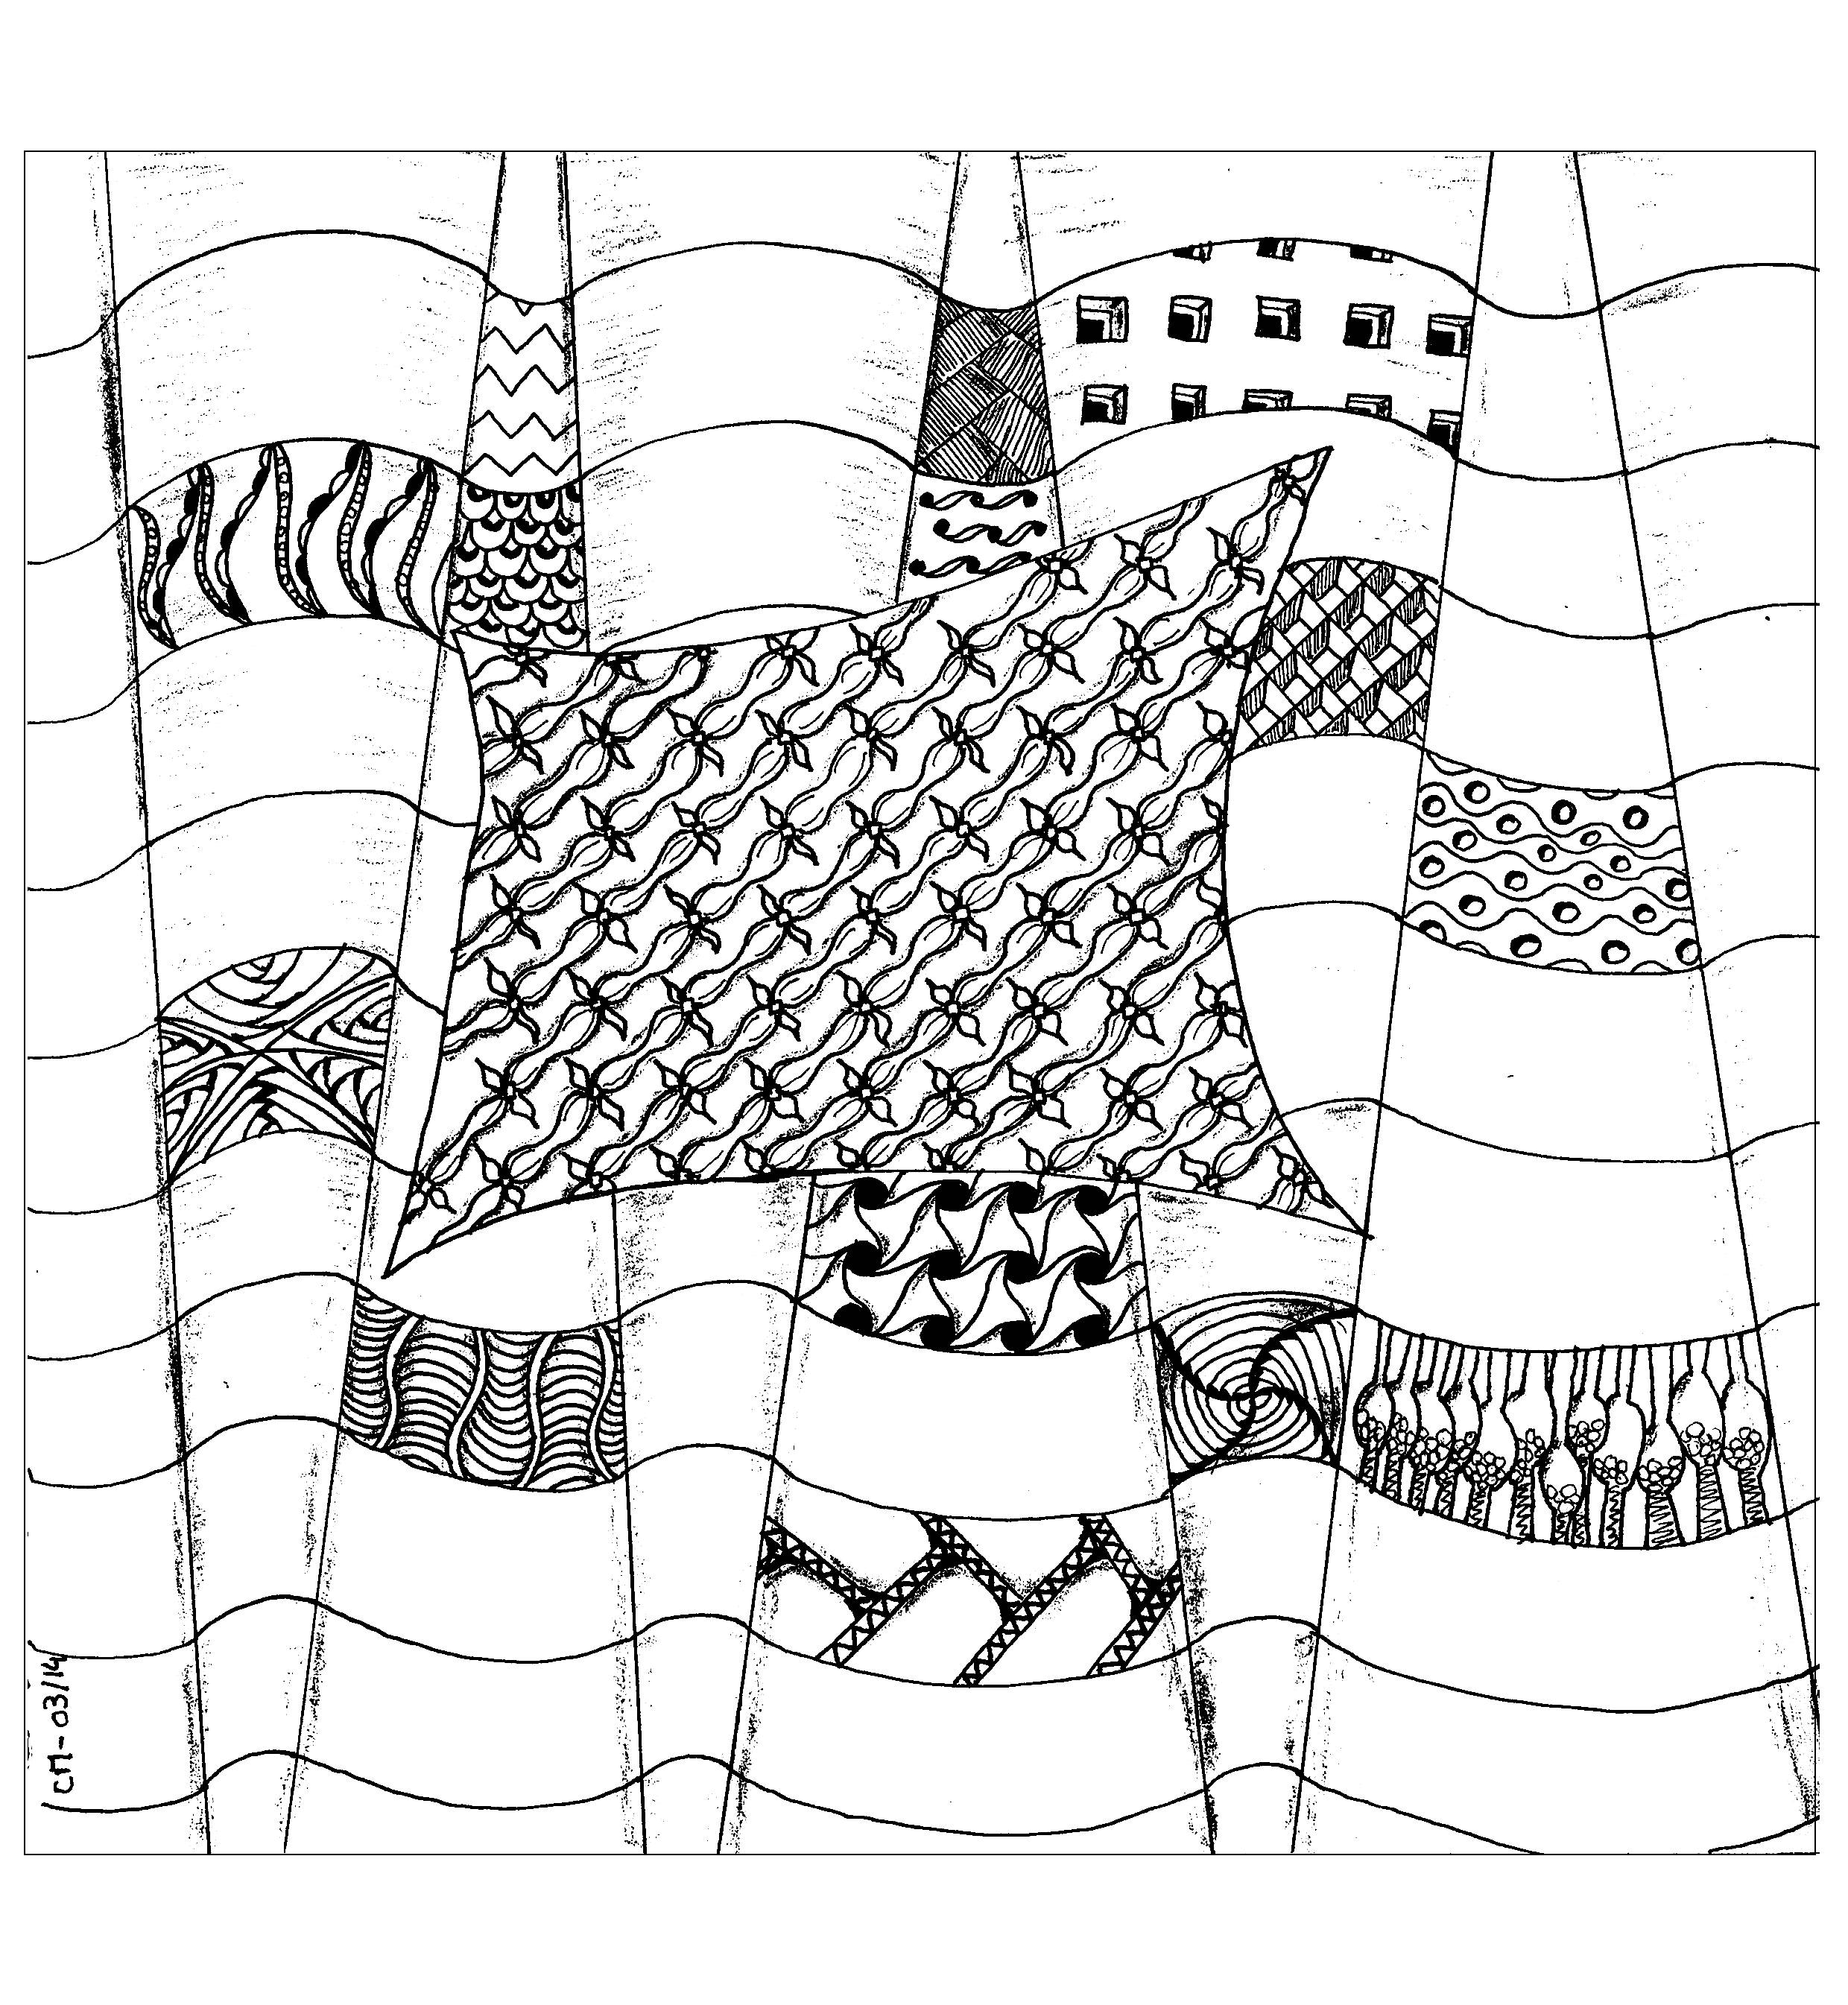 'Abstraction', exclusive coloring page See the original work, Artist : Cathy M